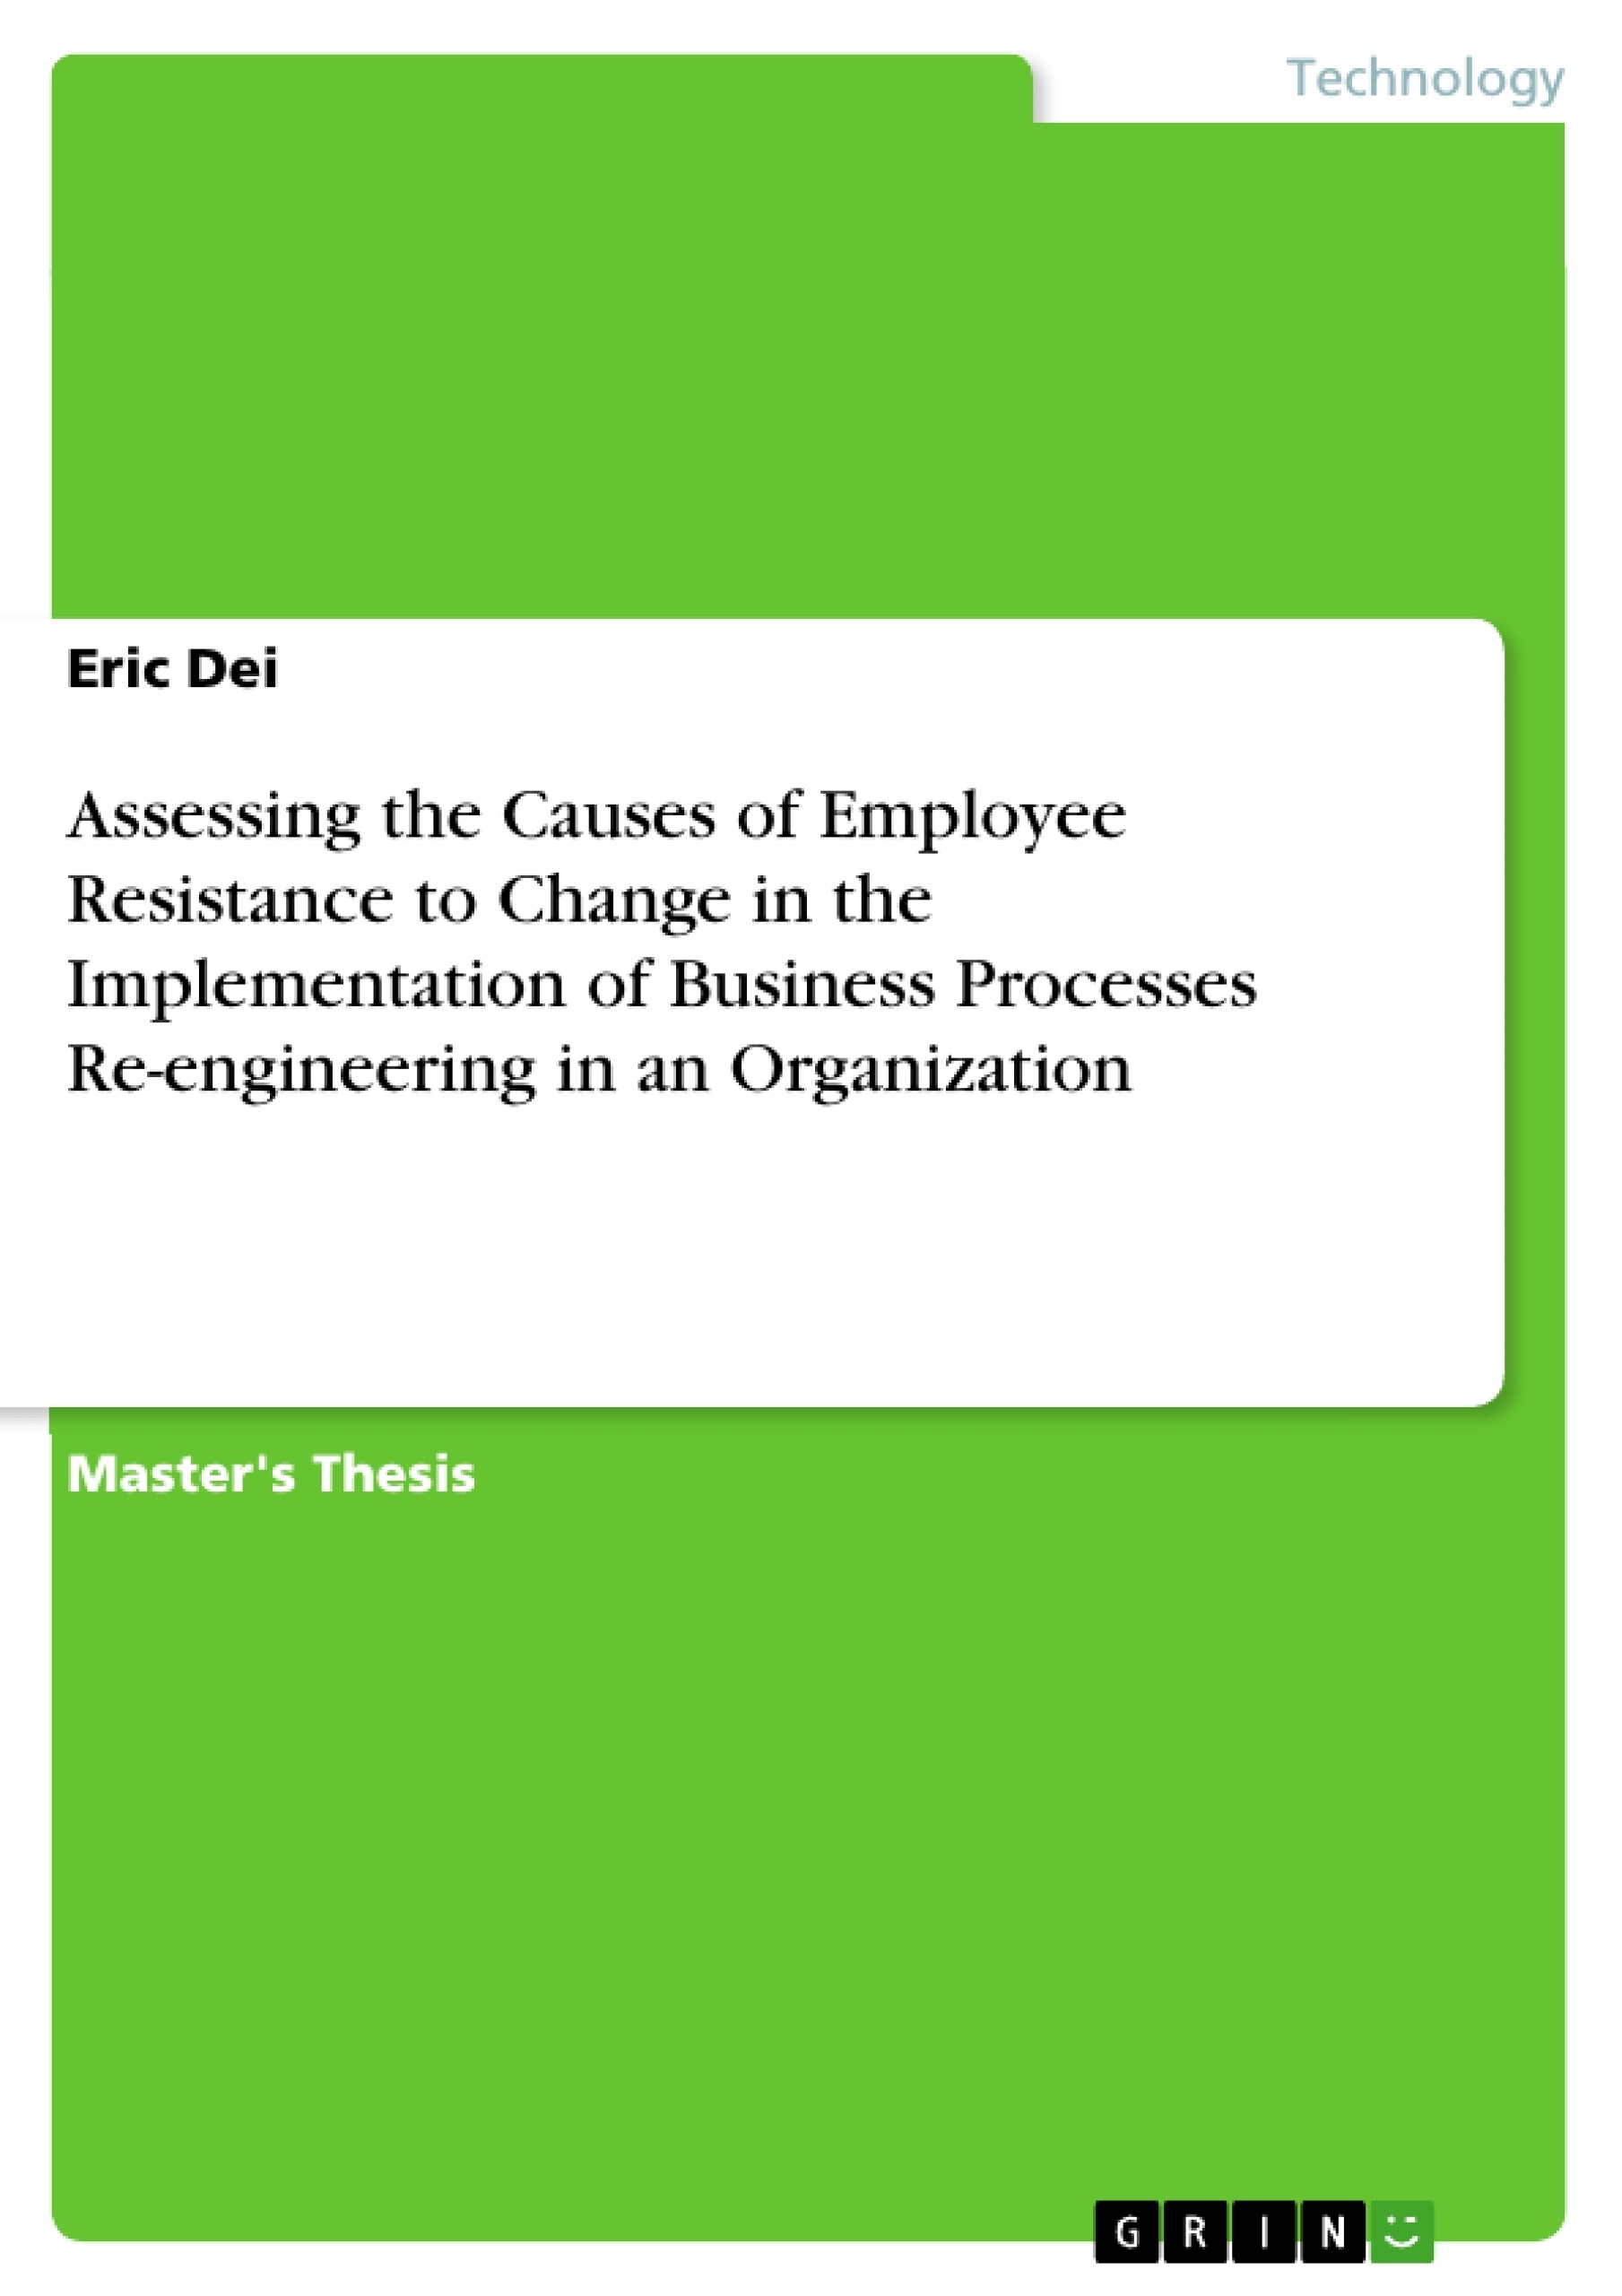 Title: Assessing the Causes of Employee Resistance to Change in the Implementation of Business Processes Re-engineering in an Organization